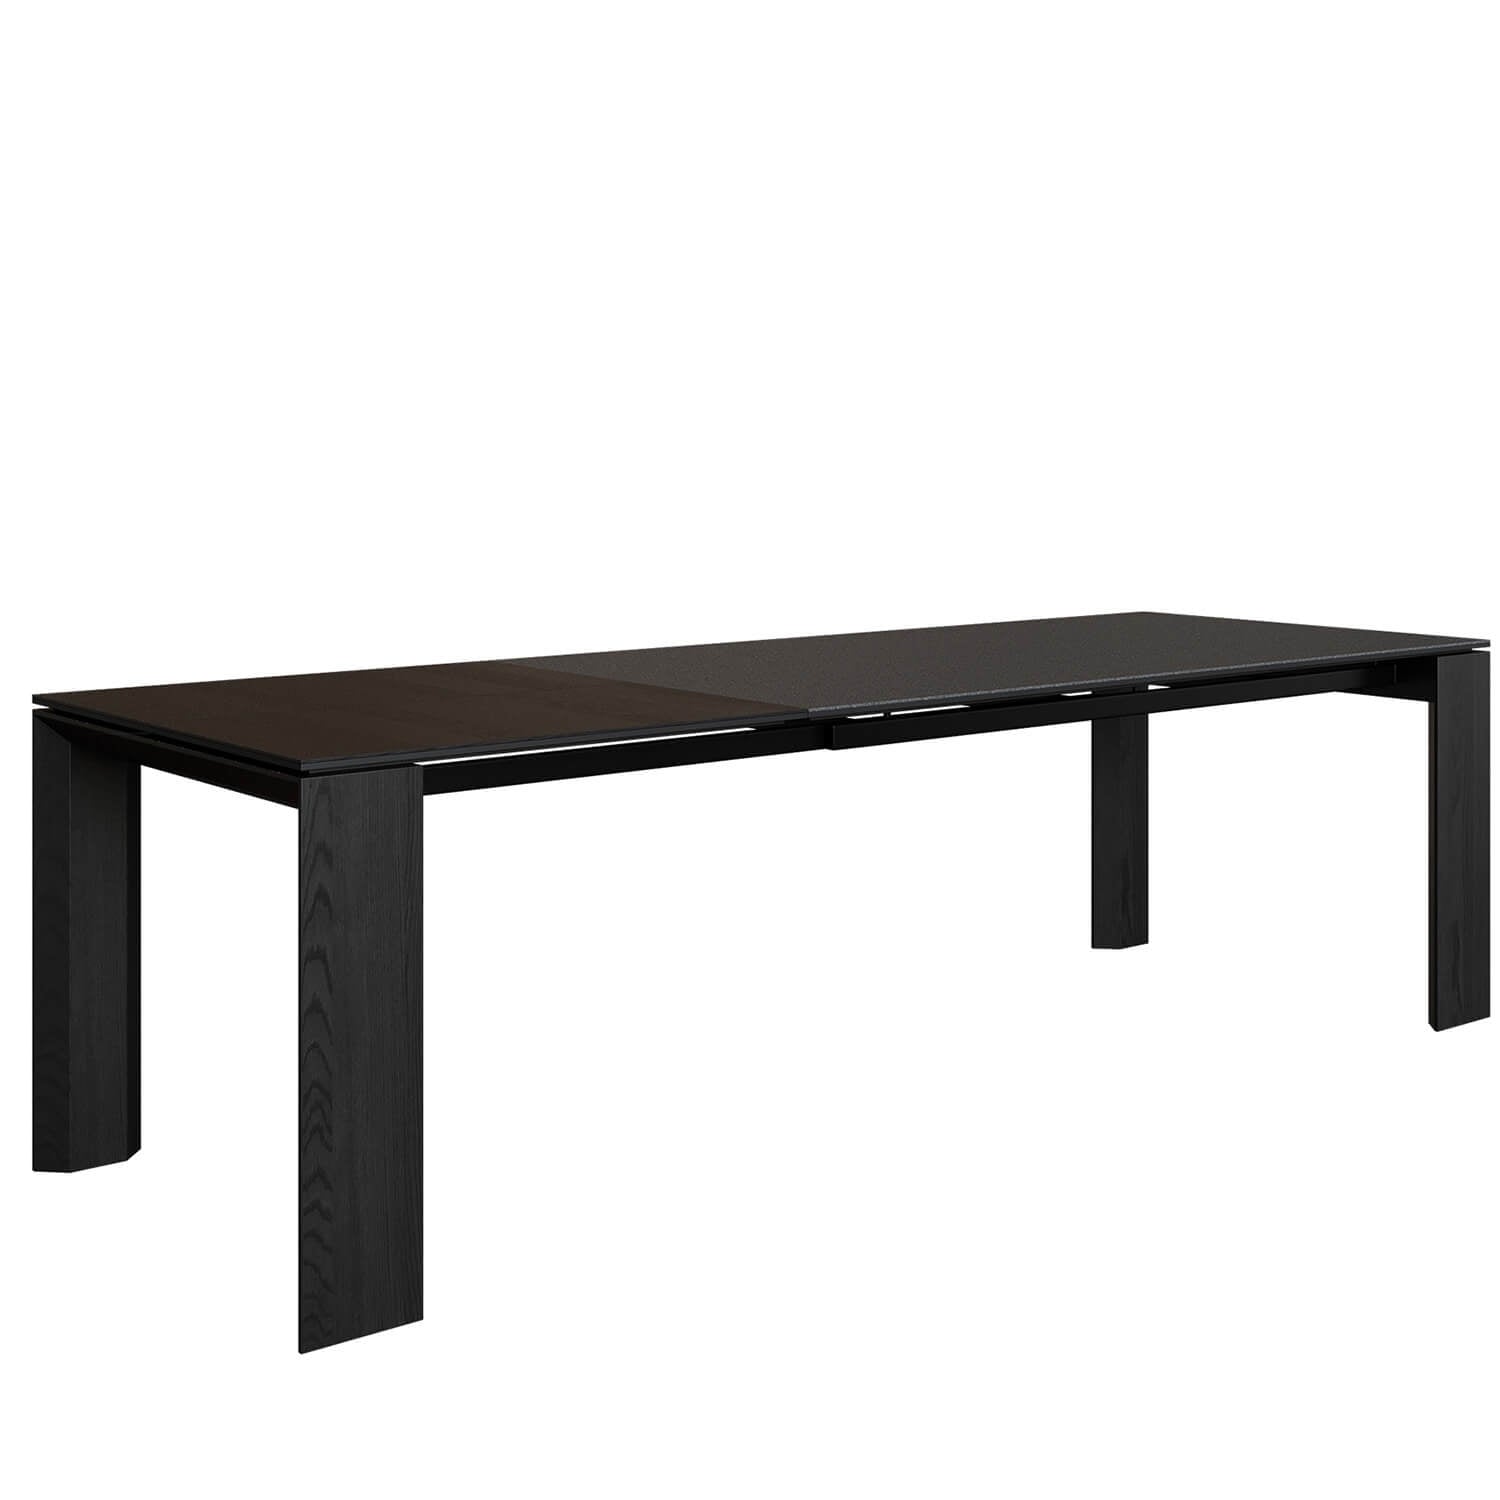 Olevano extension dining table